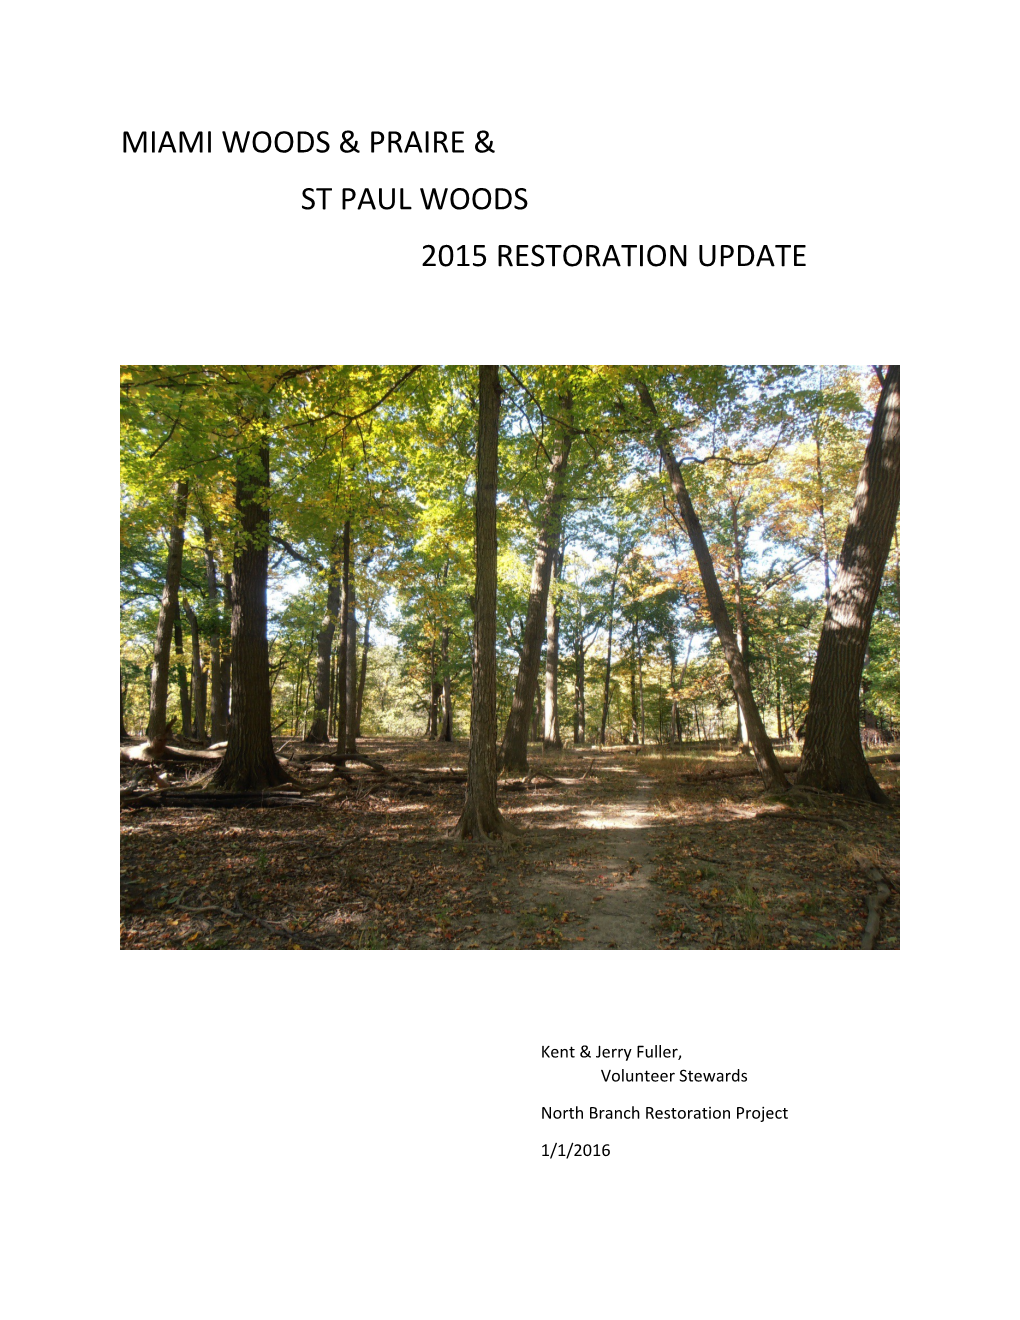 2015 MIAMI WOODS and ST PAUL WOODSRESTORATION ACTIVITIES